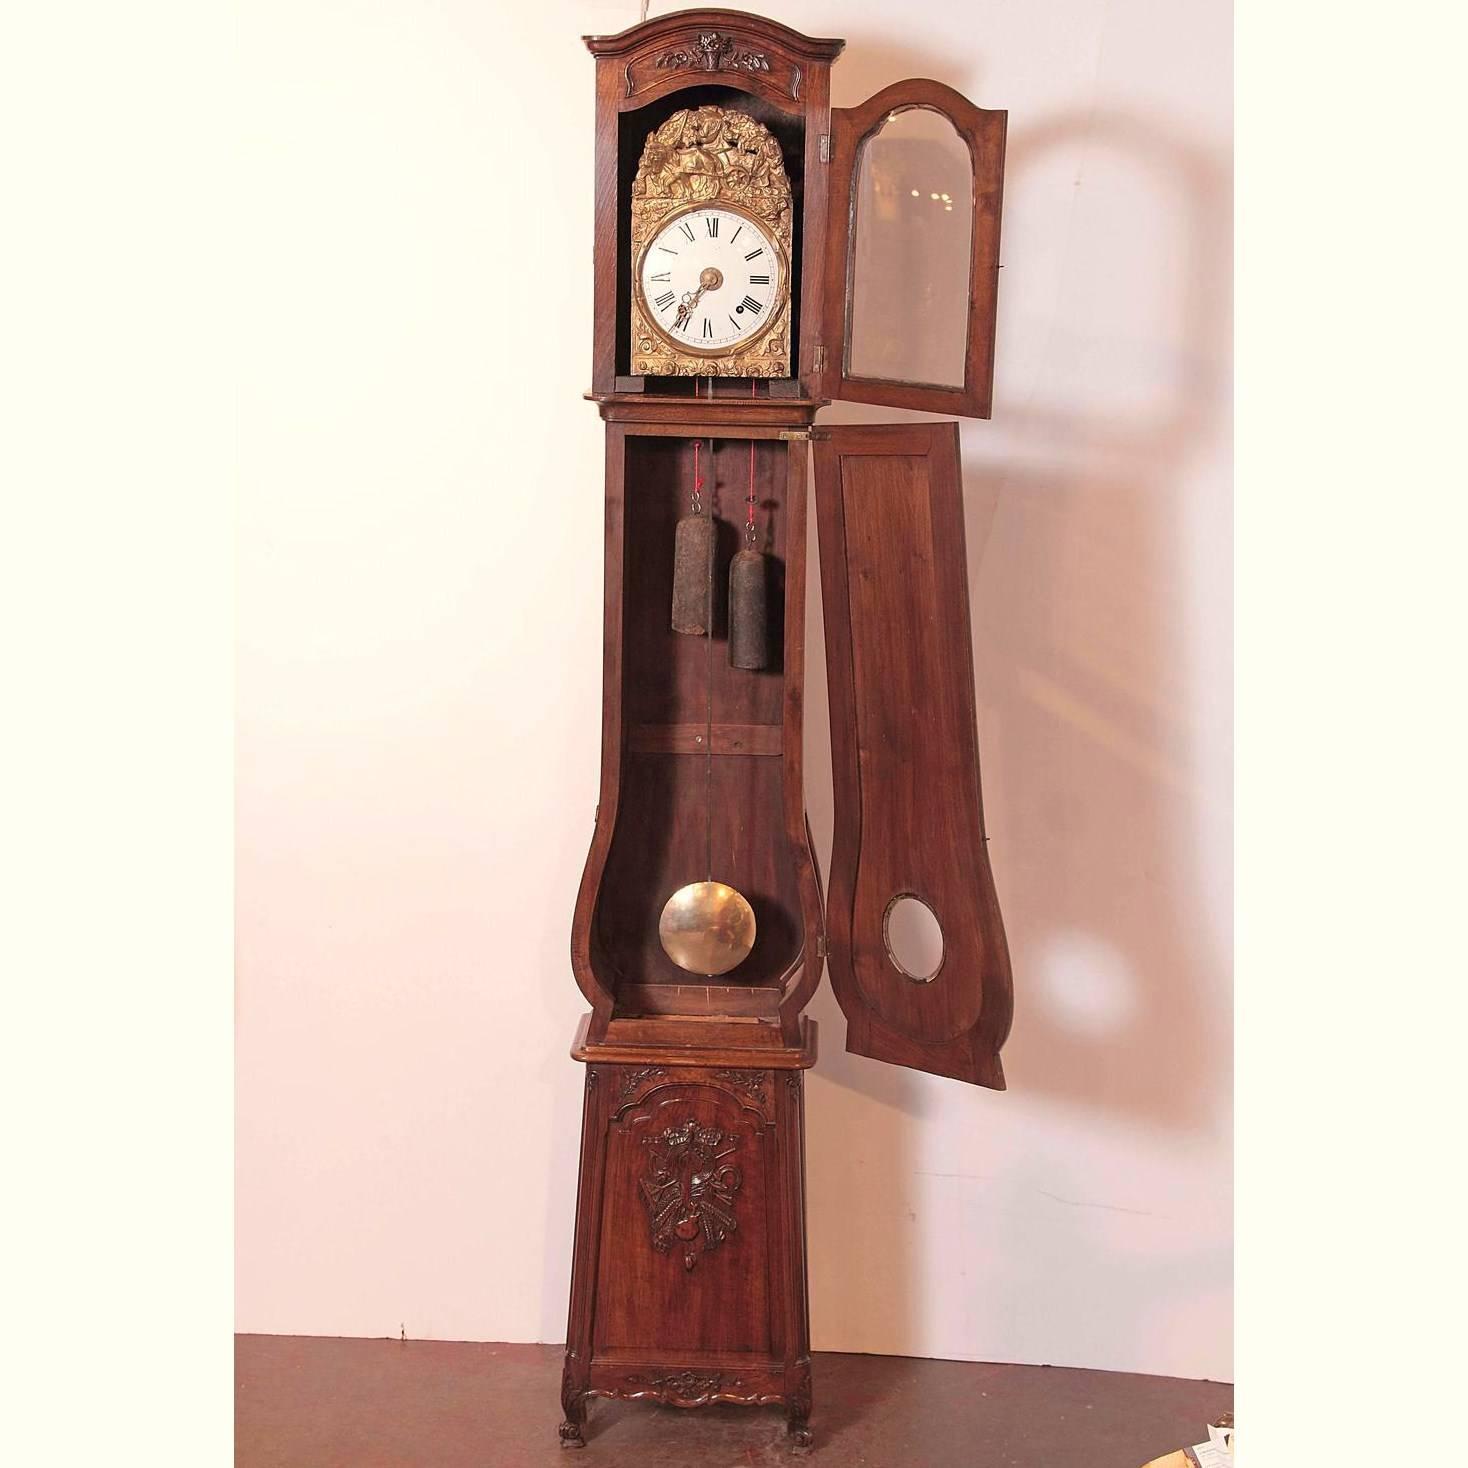 This beautiful long case clock was hand-carved in Avignon, France, circa 1880; the antique fruitwood piece sits on small cabriole feet and features all the typical carving attributes and motifs from Provence including farmer's tools, music